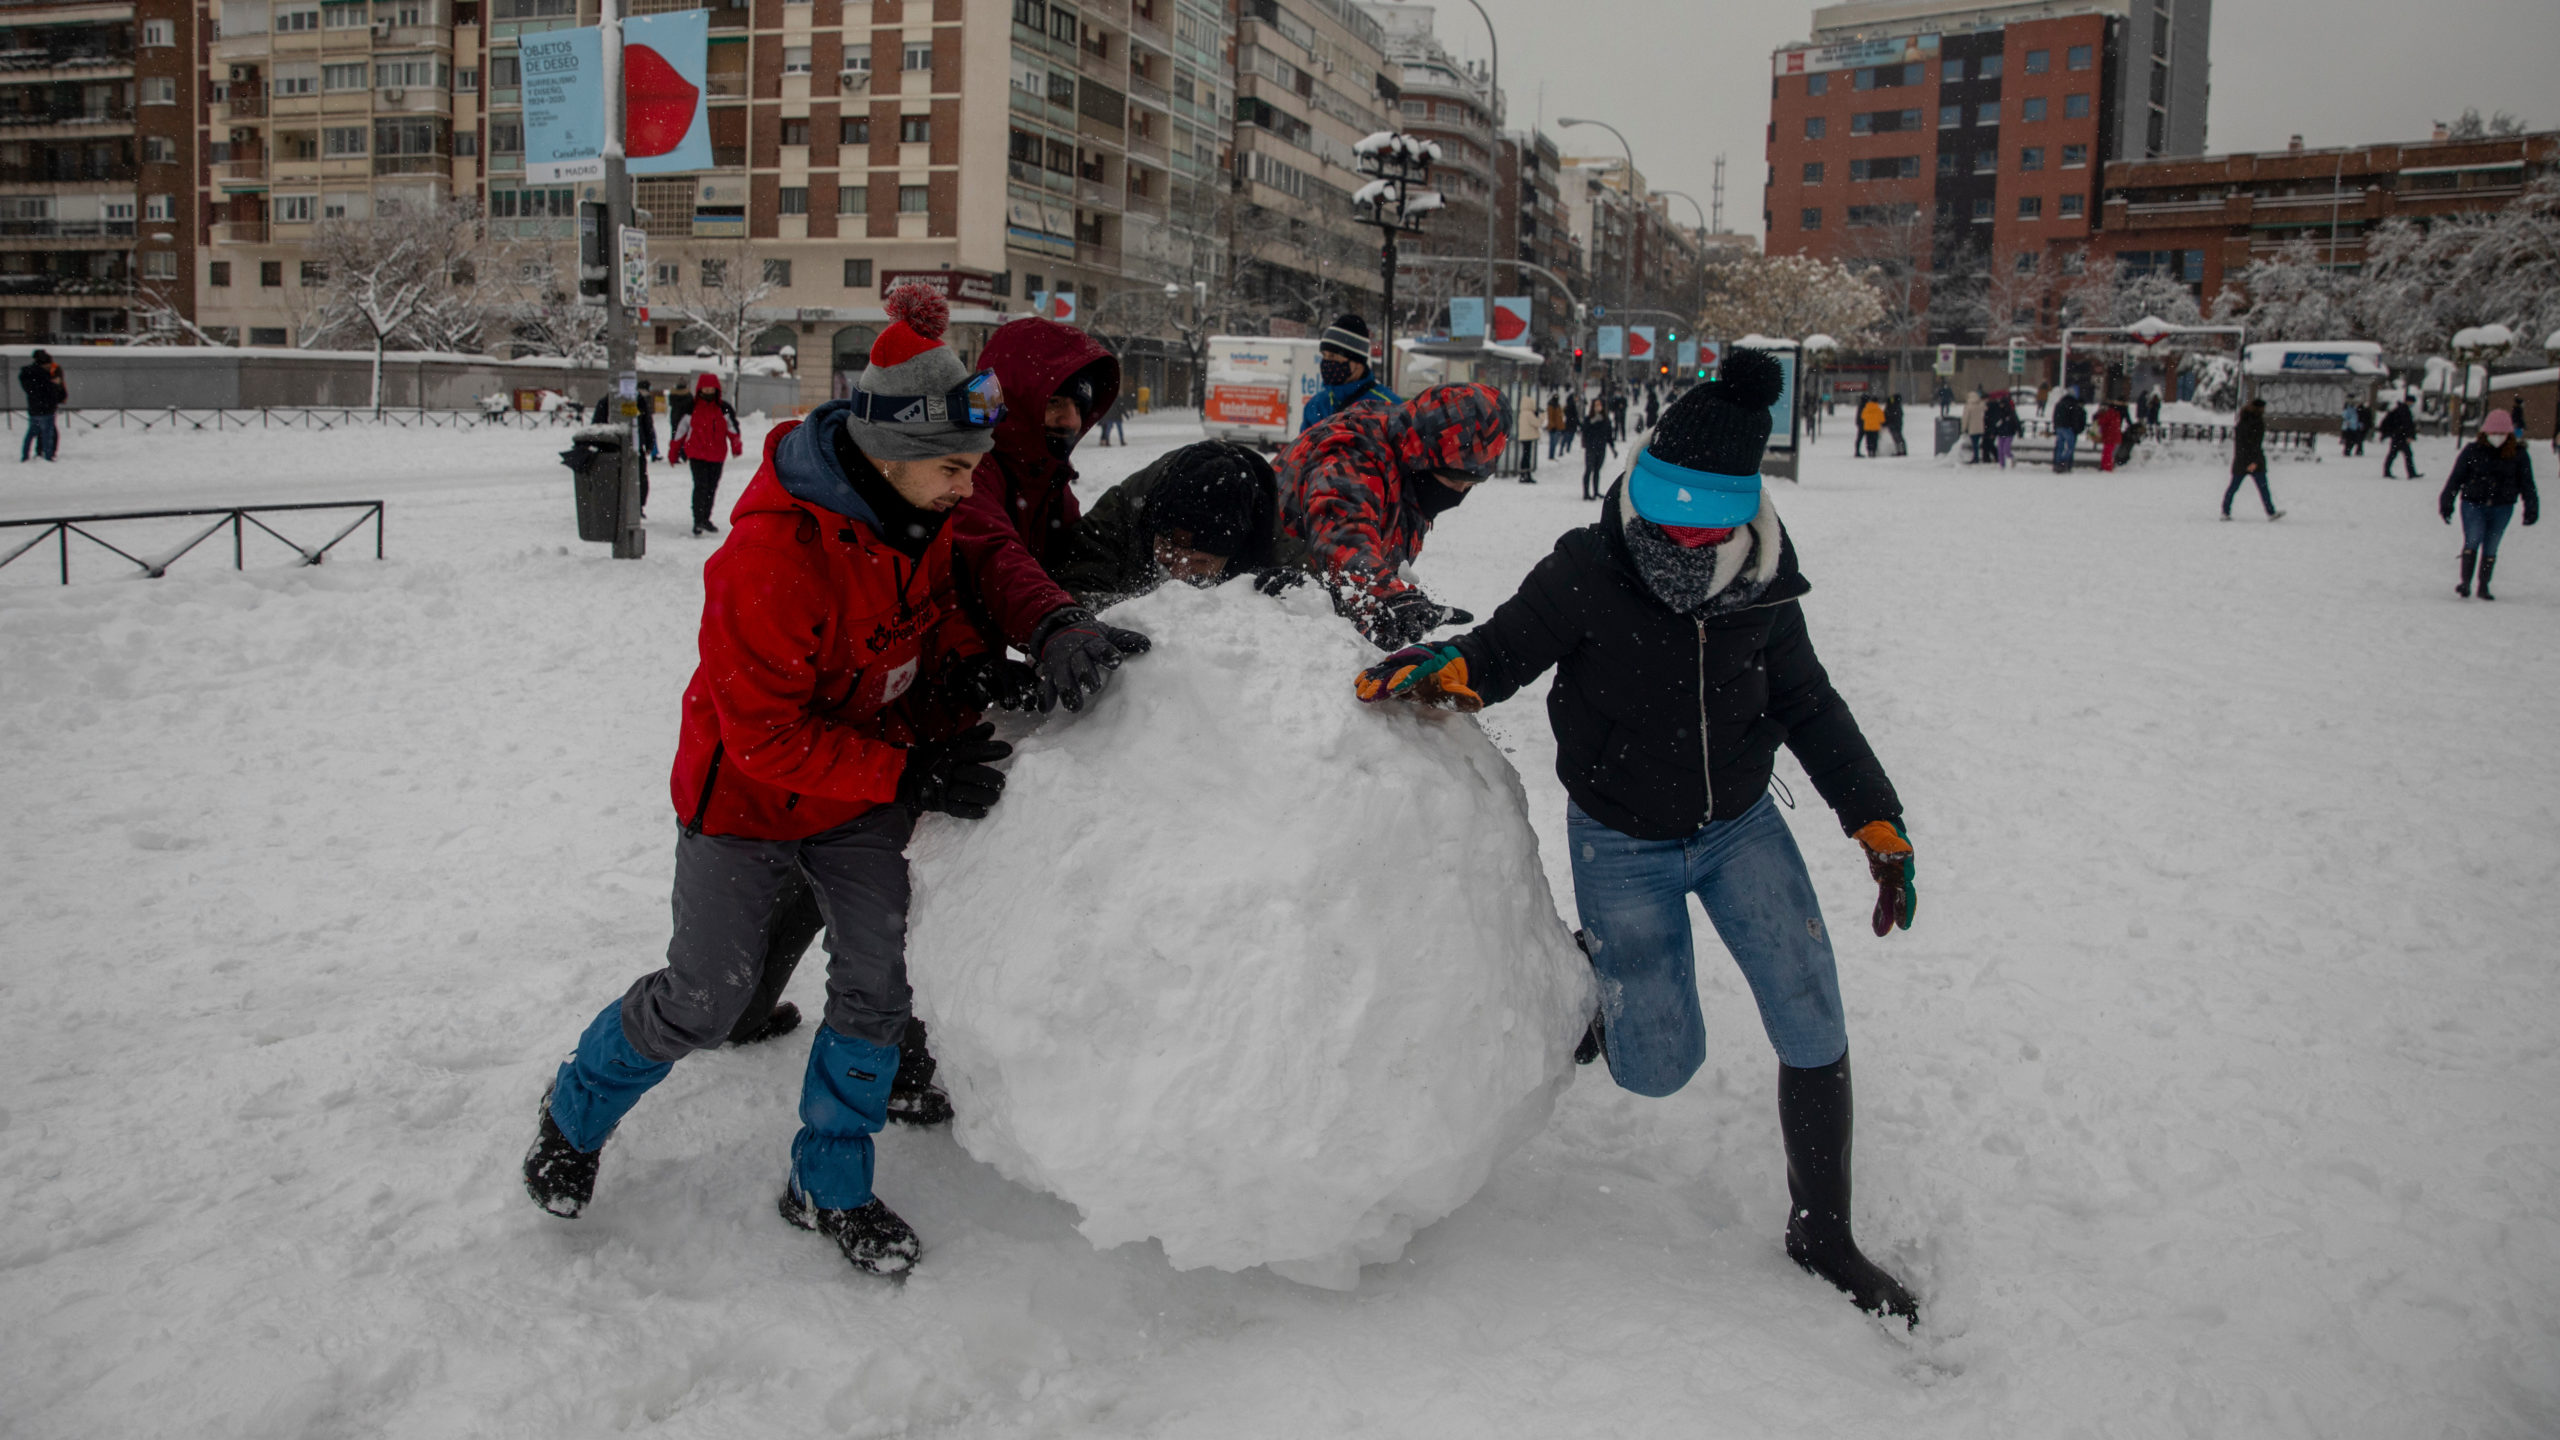 People make a big snowball at Las Ventas during heavy snowfall on January 09, 2021 in Madrid, Spain.  (Photo: Pablo Blazquez Dominguez, Getty Images)